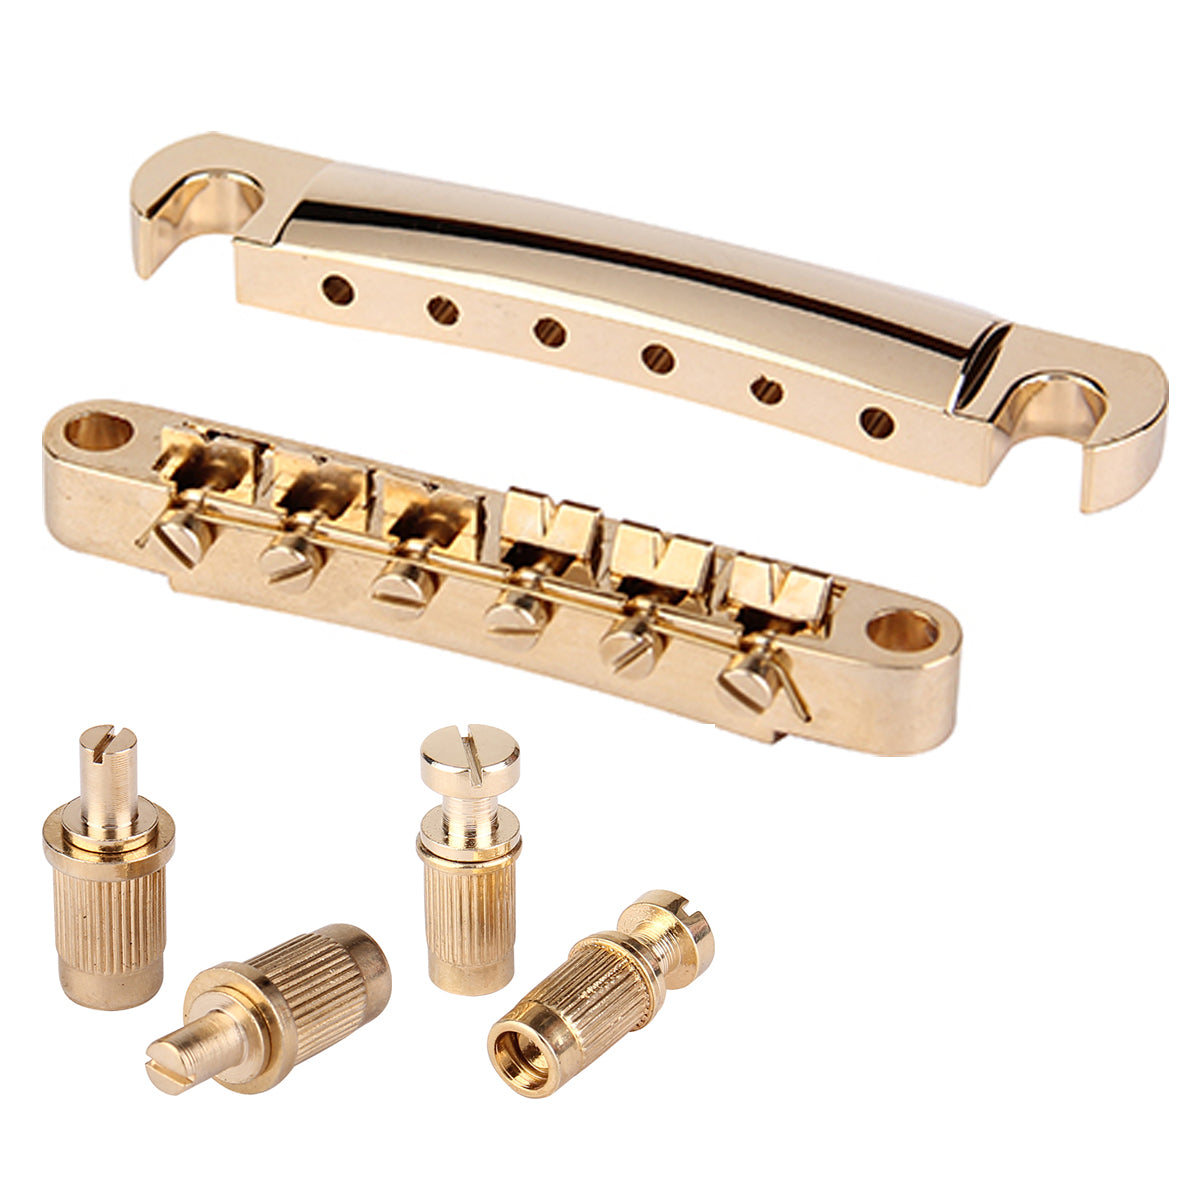 Musiclily ABR-1 Style Tune-o-matic Bridge and Tailpiece Set for Les Paul Style Guitar,Gold